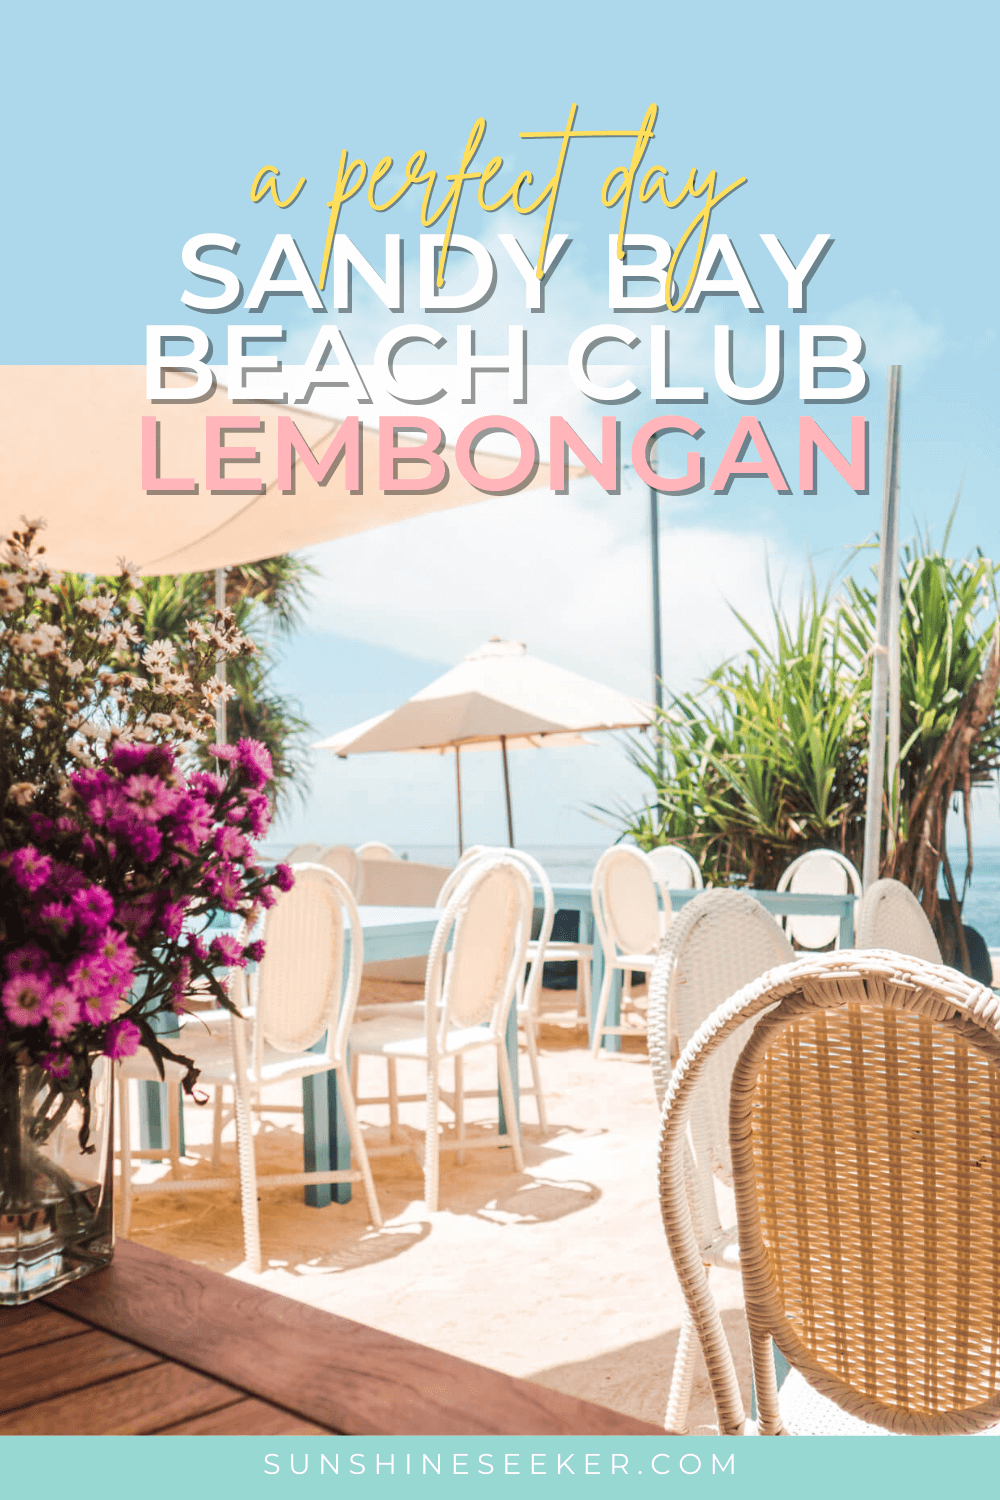 Looking for the best beach club on Nusa Lembongan? Check out Sandy Bay Beach Club, a picture perfect place with pool, a white sand beach and even a spa.